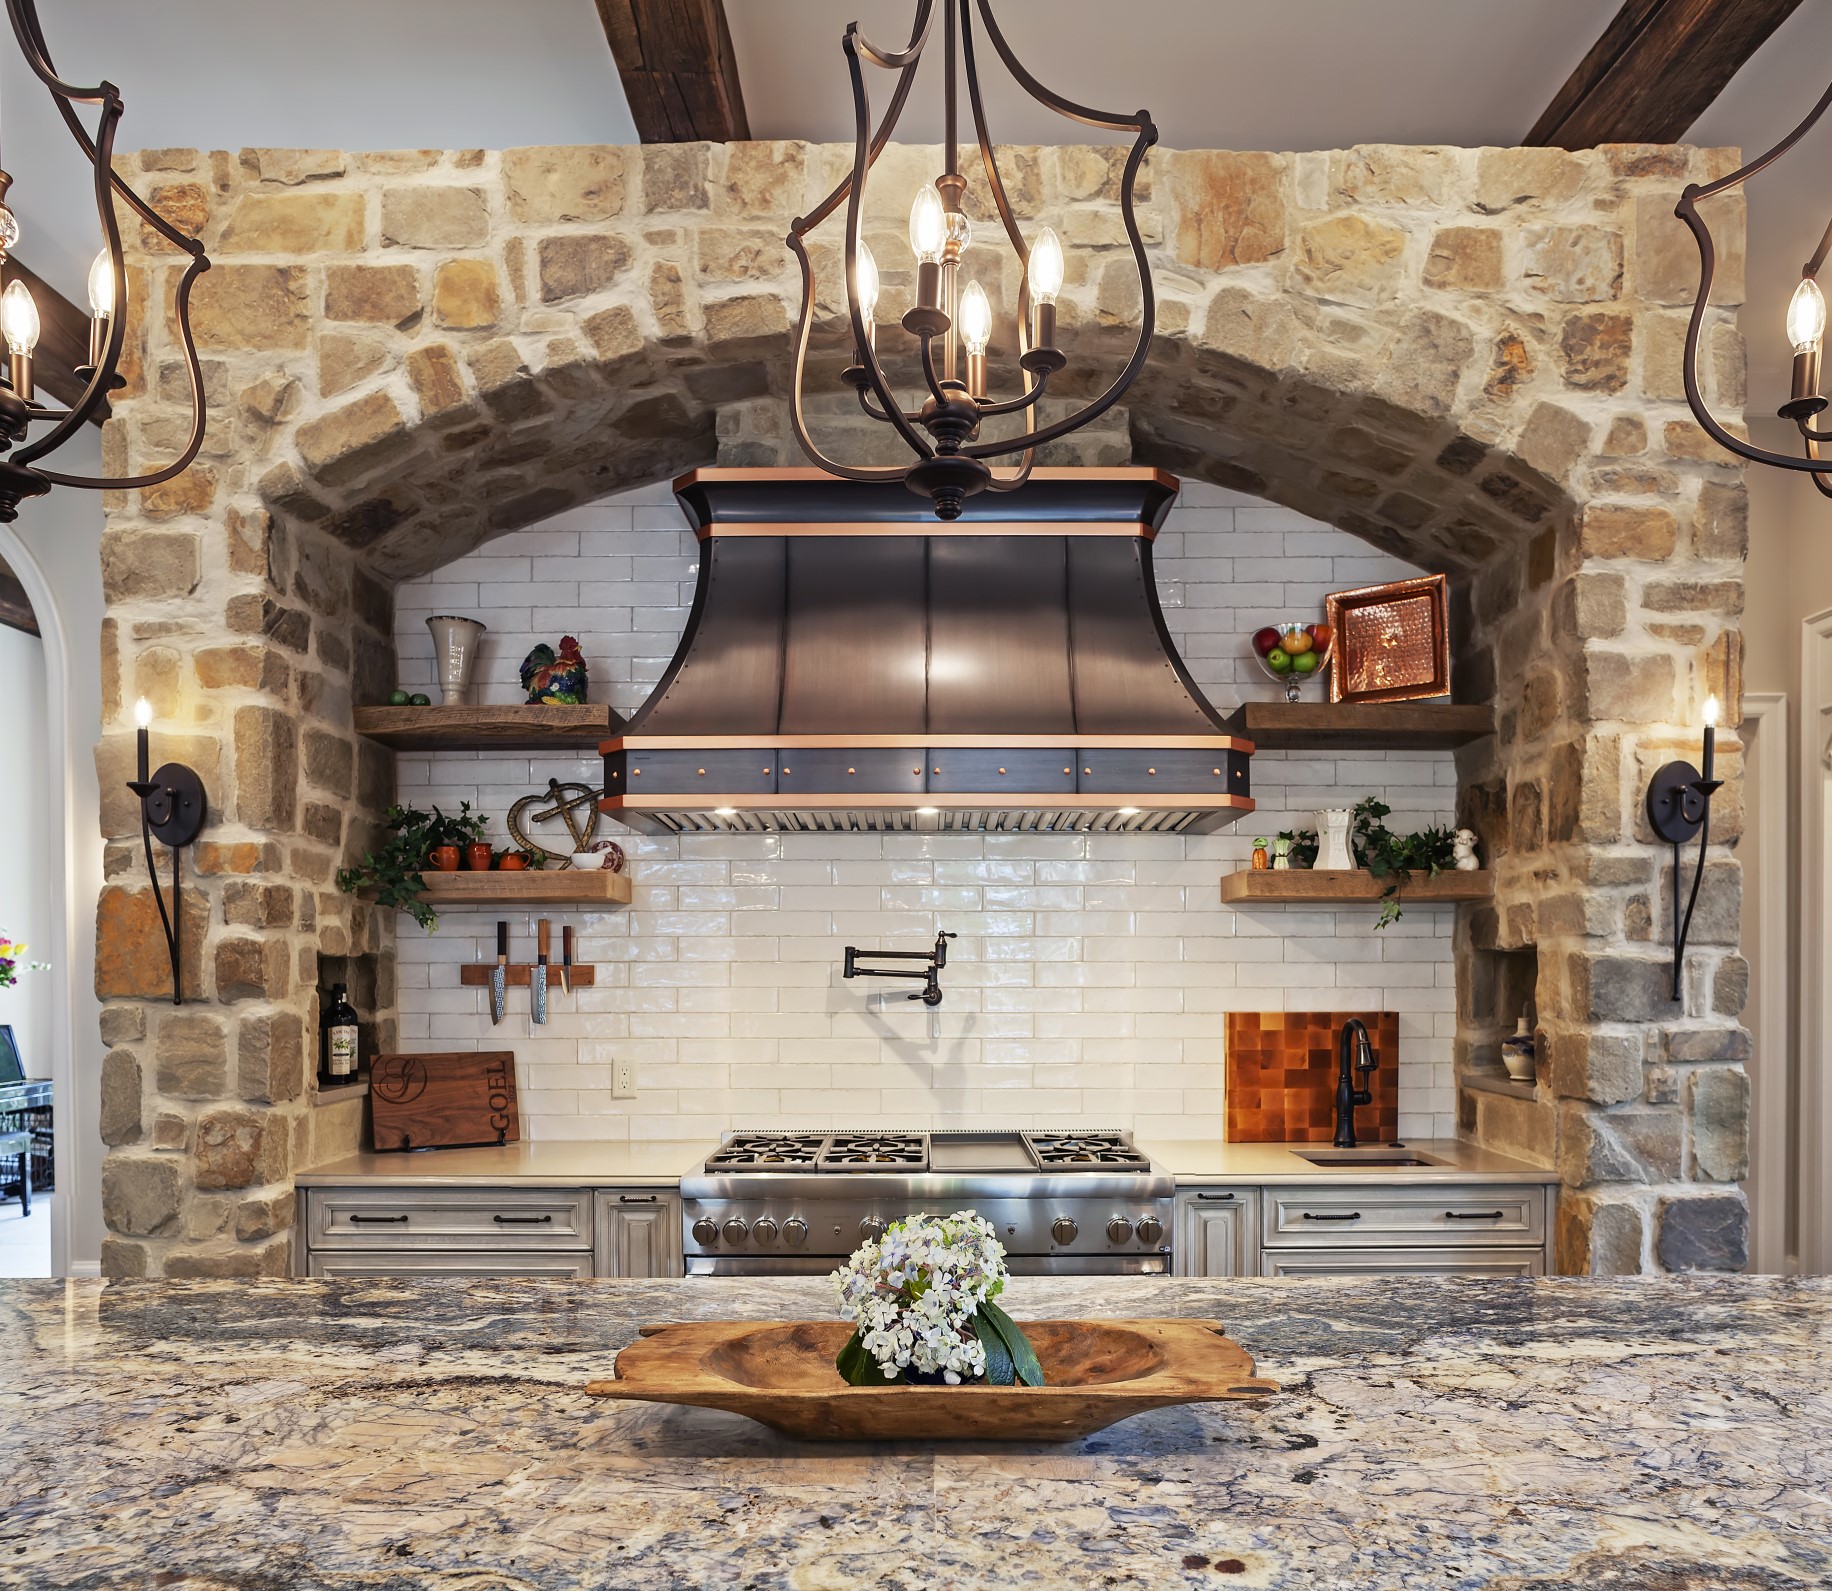 Rustic kitchen design with copper hood, grey cabinets, marble countertops and brick backsplash